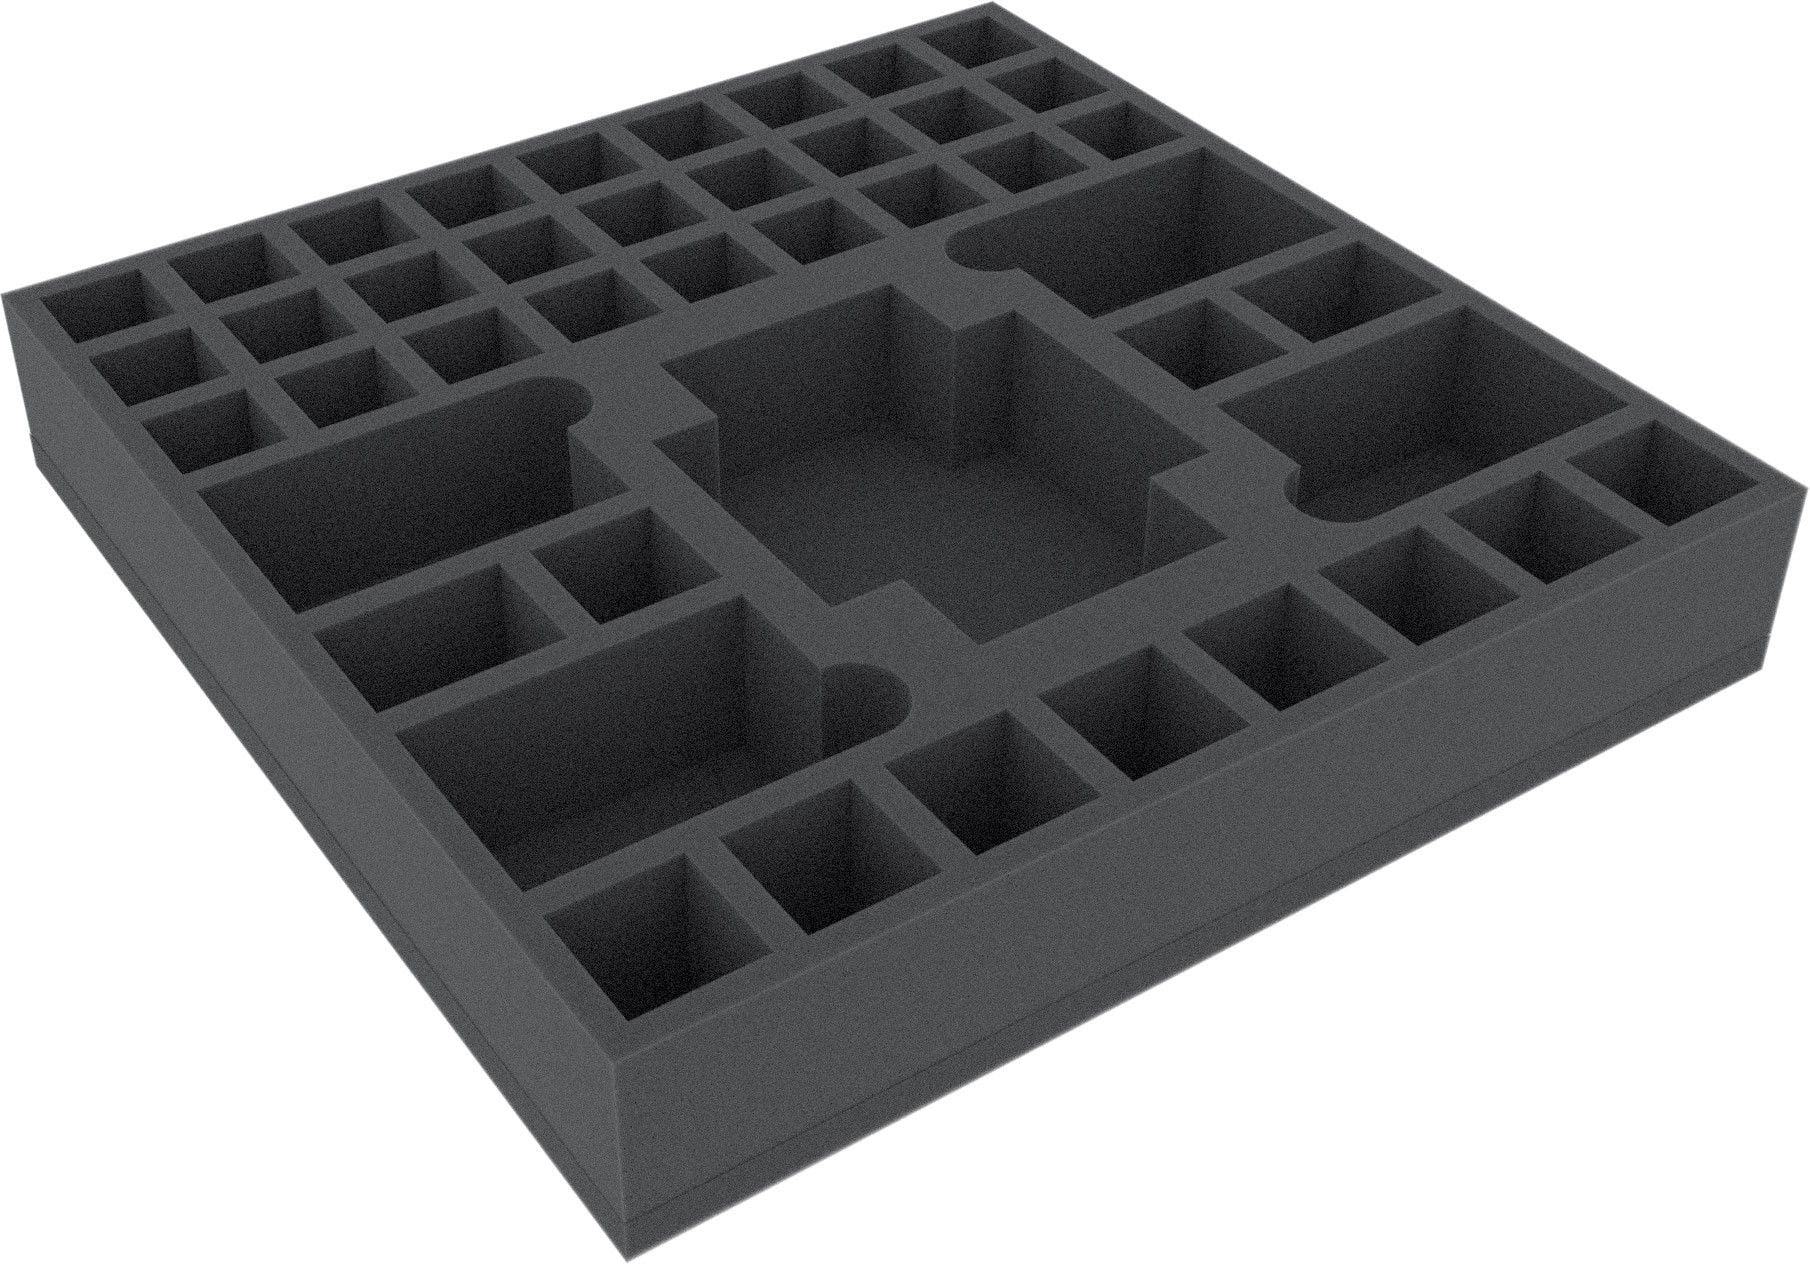 295mm x 295mm x 50mm  (2 inches) foam tray for board game boxes 2